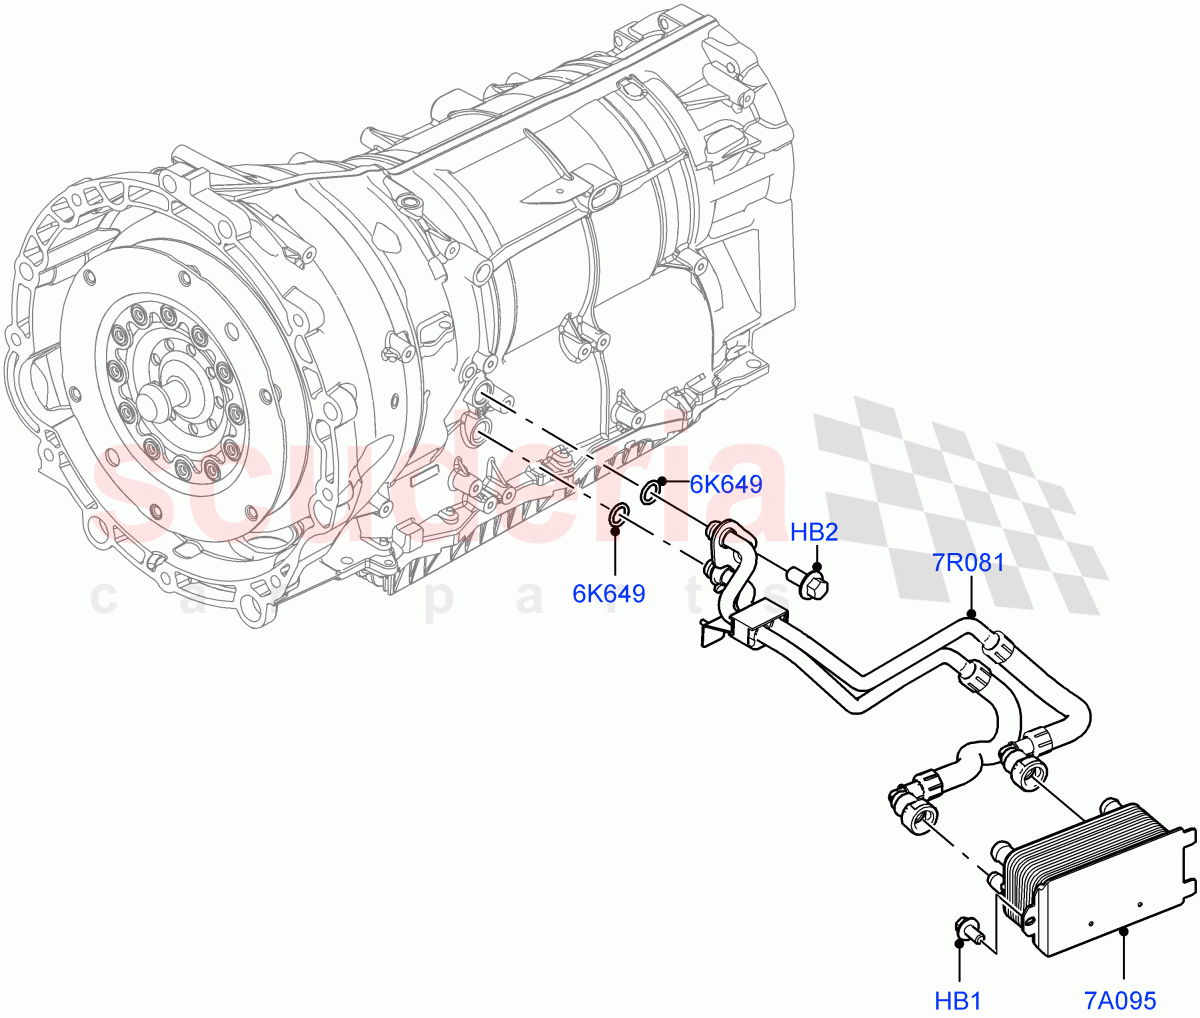 Transmission Cooling Systems(3.0L AJ20P6 Petrol High,8 Speed Auto Trans ZF 8HP76,3.0L AJ20D6 Diesel High)((V)FROMKA000001) of Land Rover Land Rover Range Rover (2012-2021) [2.0 Turbo Petrol GTDI]